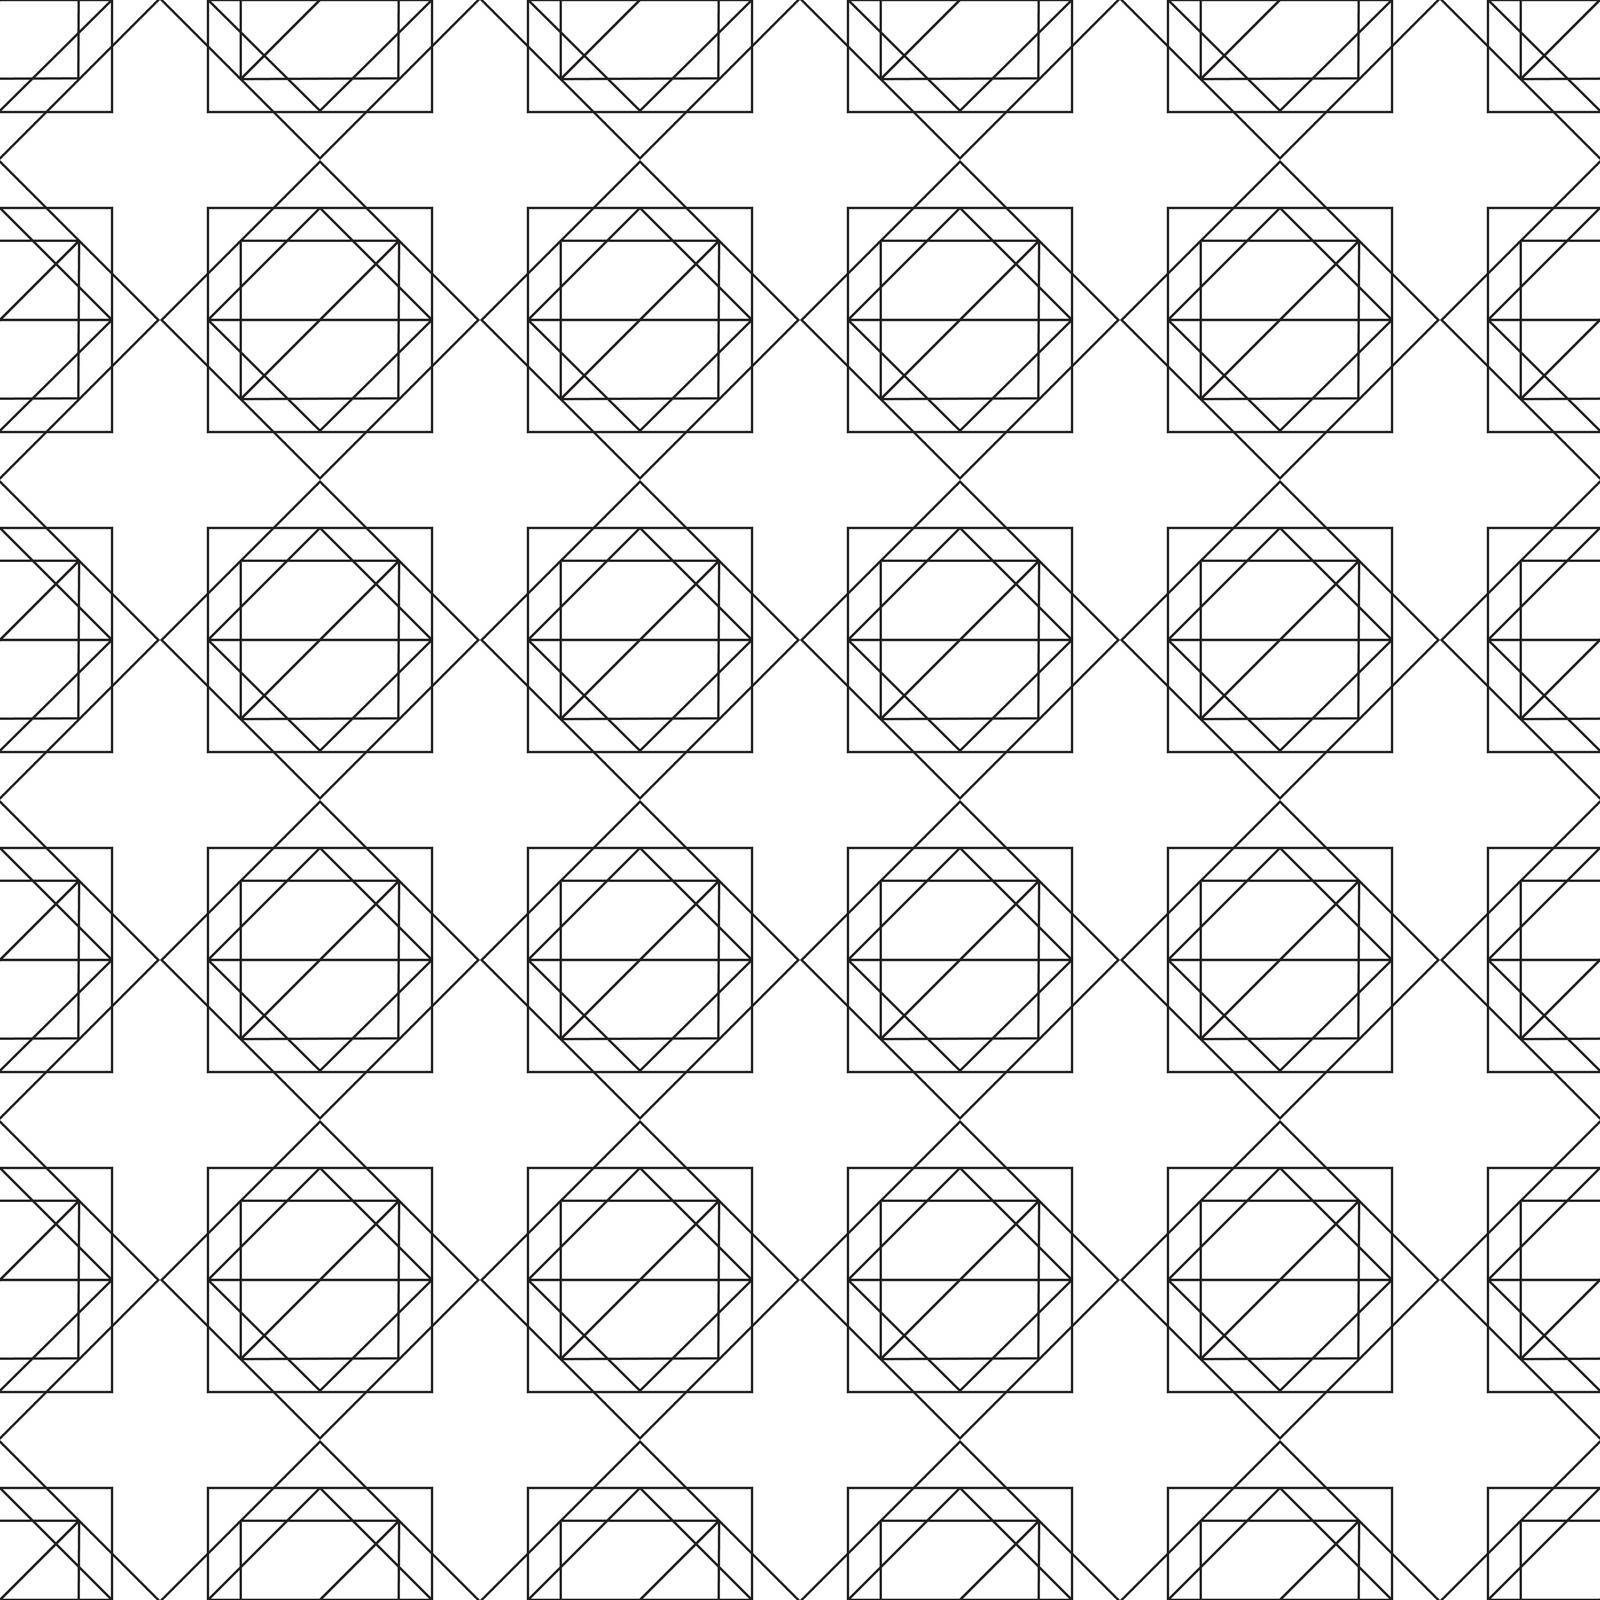 Black and white simple geometric seamless pattern. Repeating texture with square and triangular shapes.